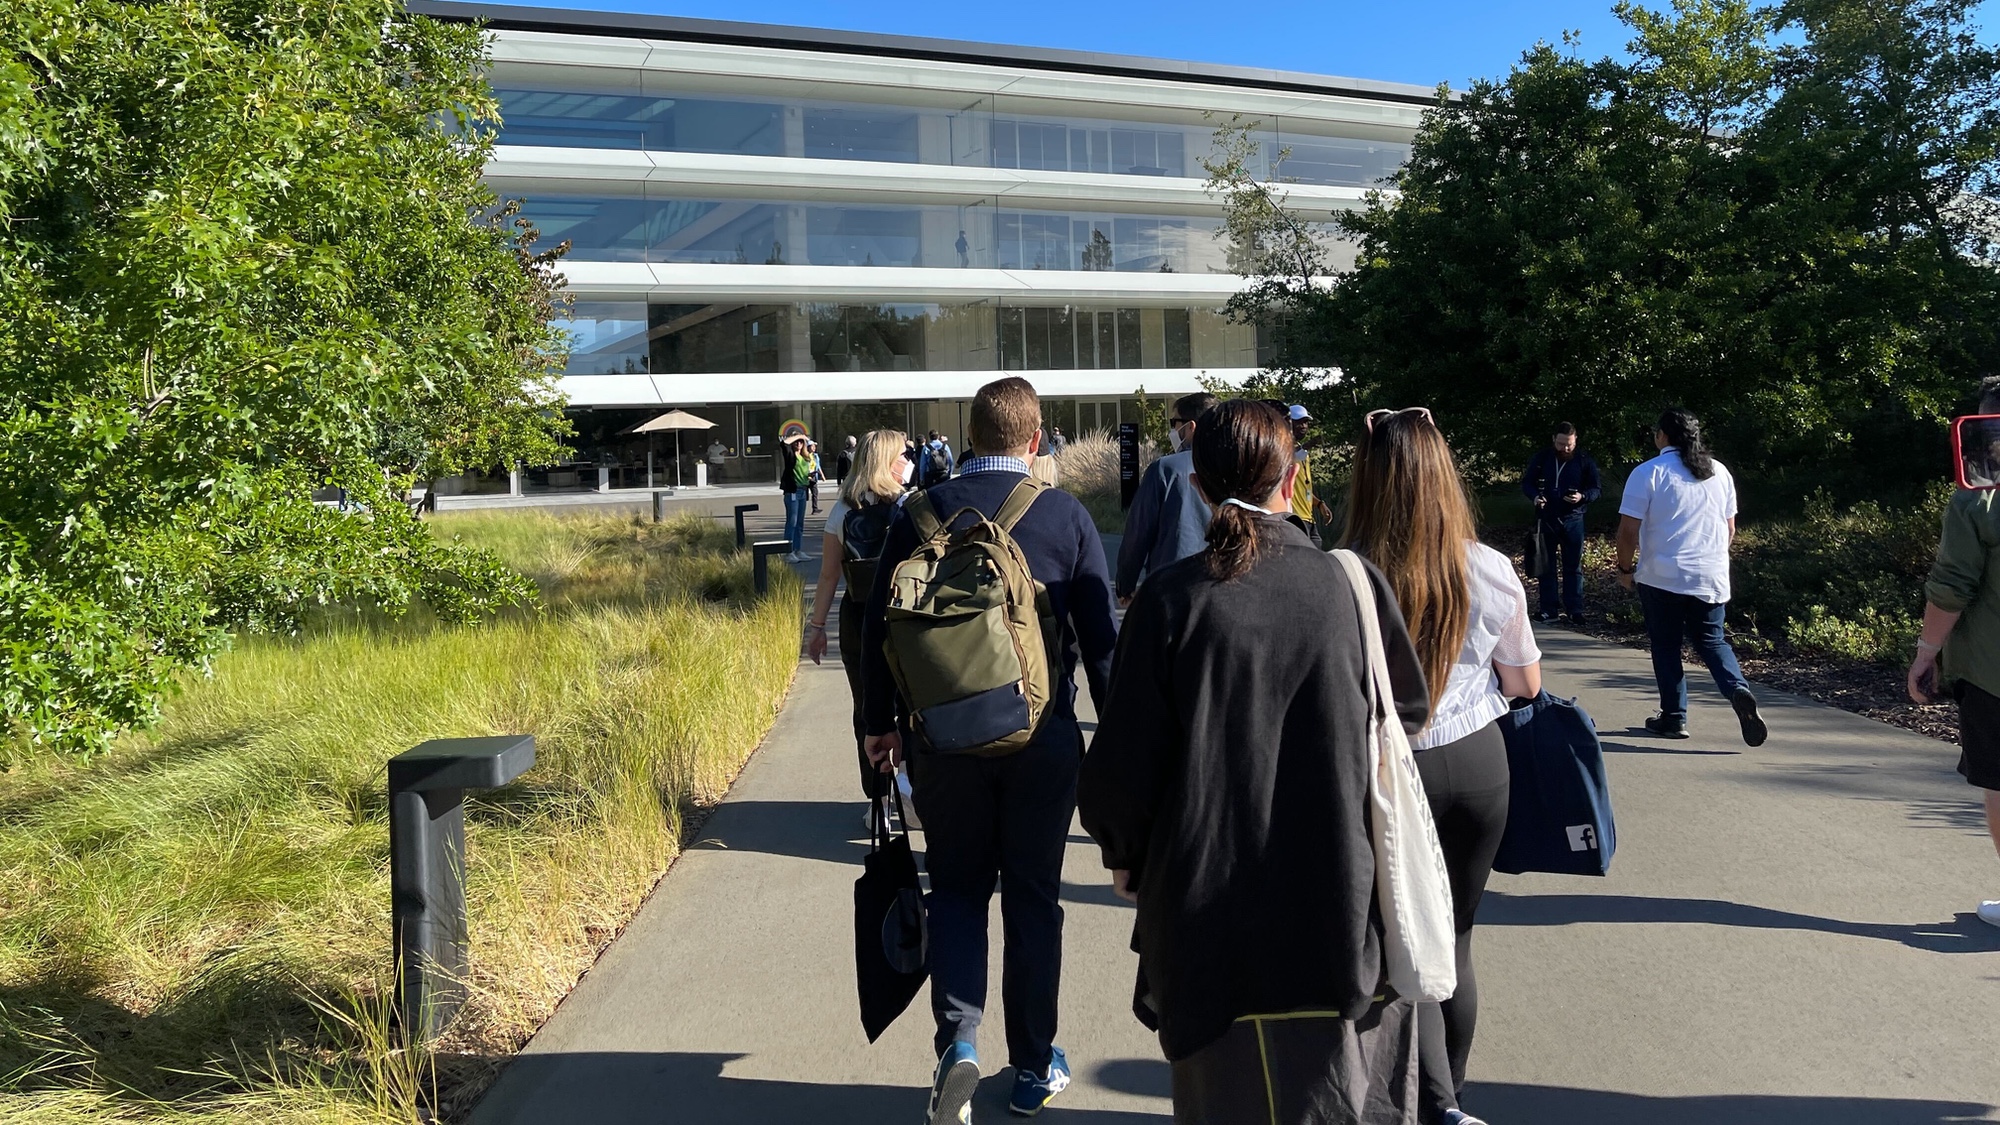 People entering Apple Park at WWDC 2022